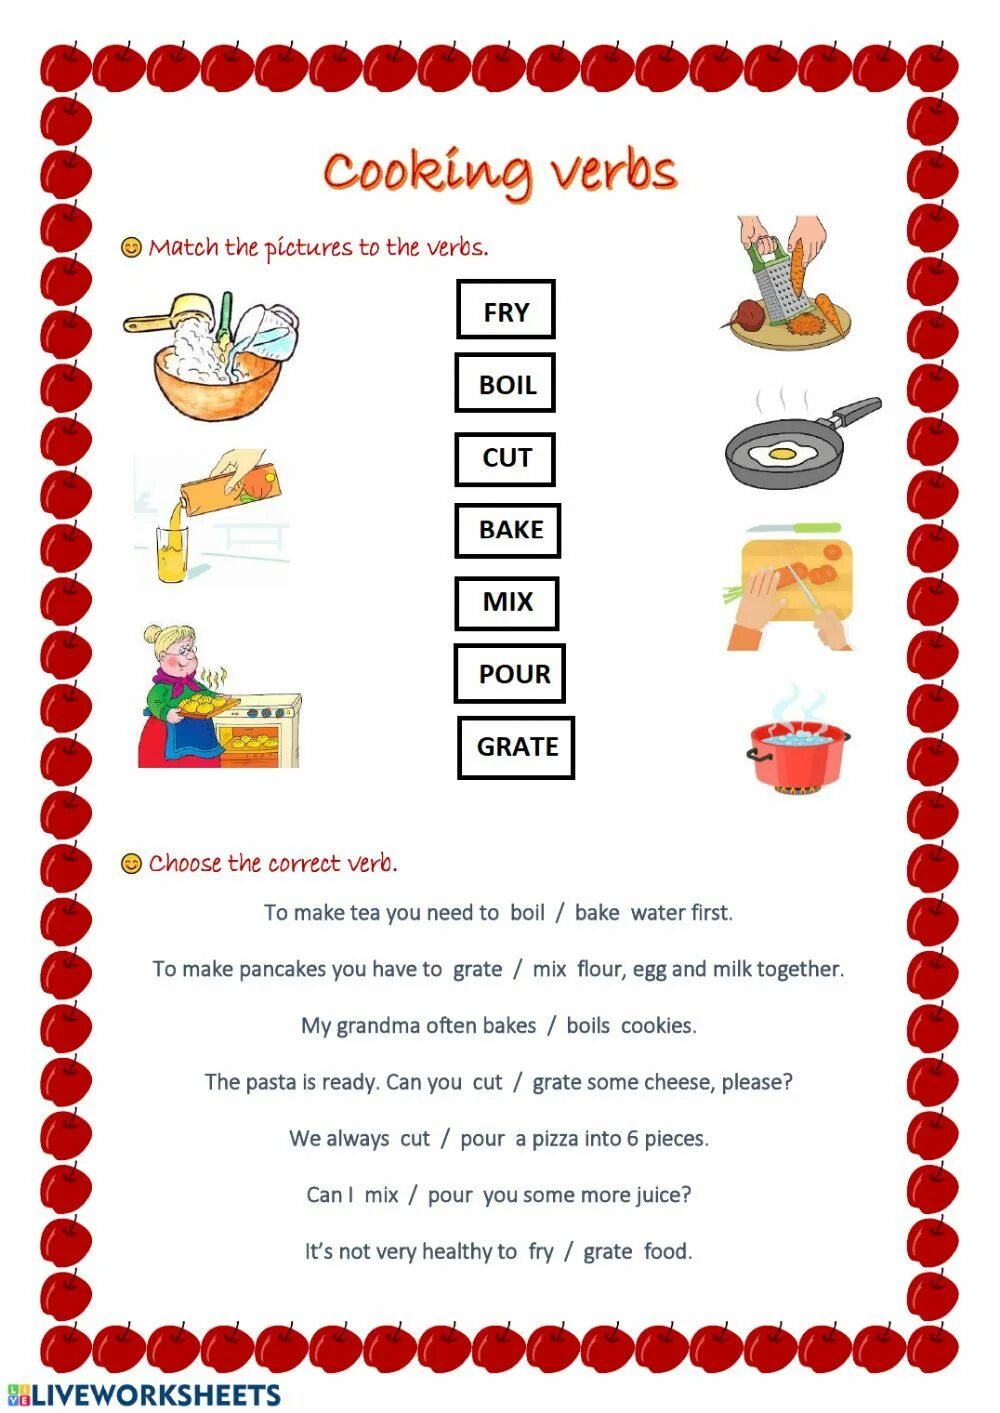 Cooking tasks. Food and Cooking Worksheets. Cooking verbs. Cooking Vocabulary for Kids. Vocabulary food and Cooking.